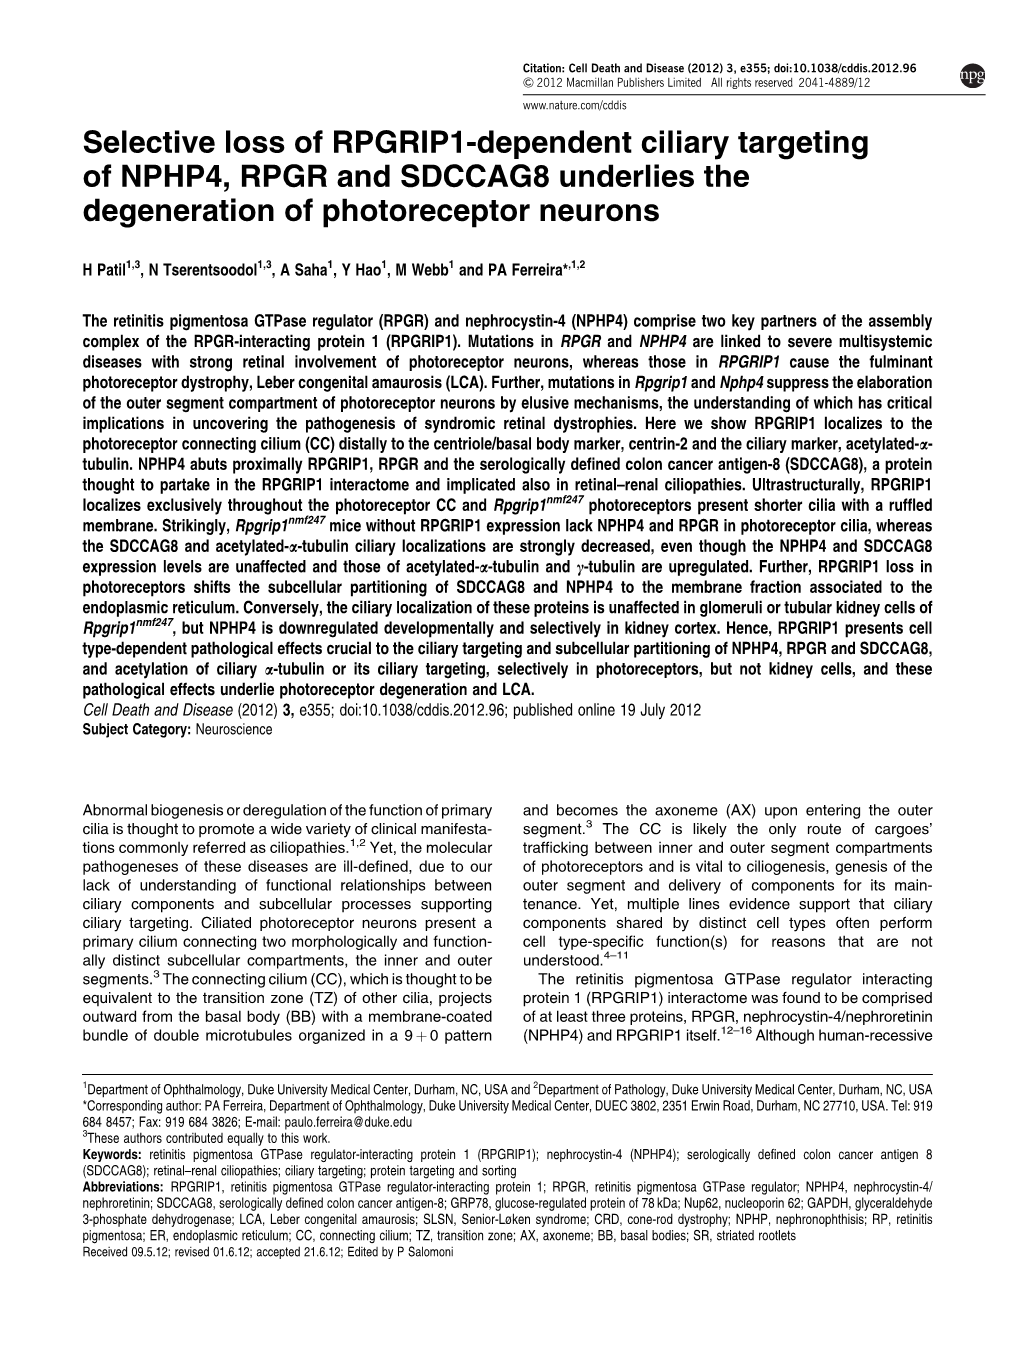 Selective Loss of RPGRIP1-Dependent Ciliary Targeting of NPHP4, RPGR and SDCCAG8 Underlies the Degeneration of Photoreceptor Neurons